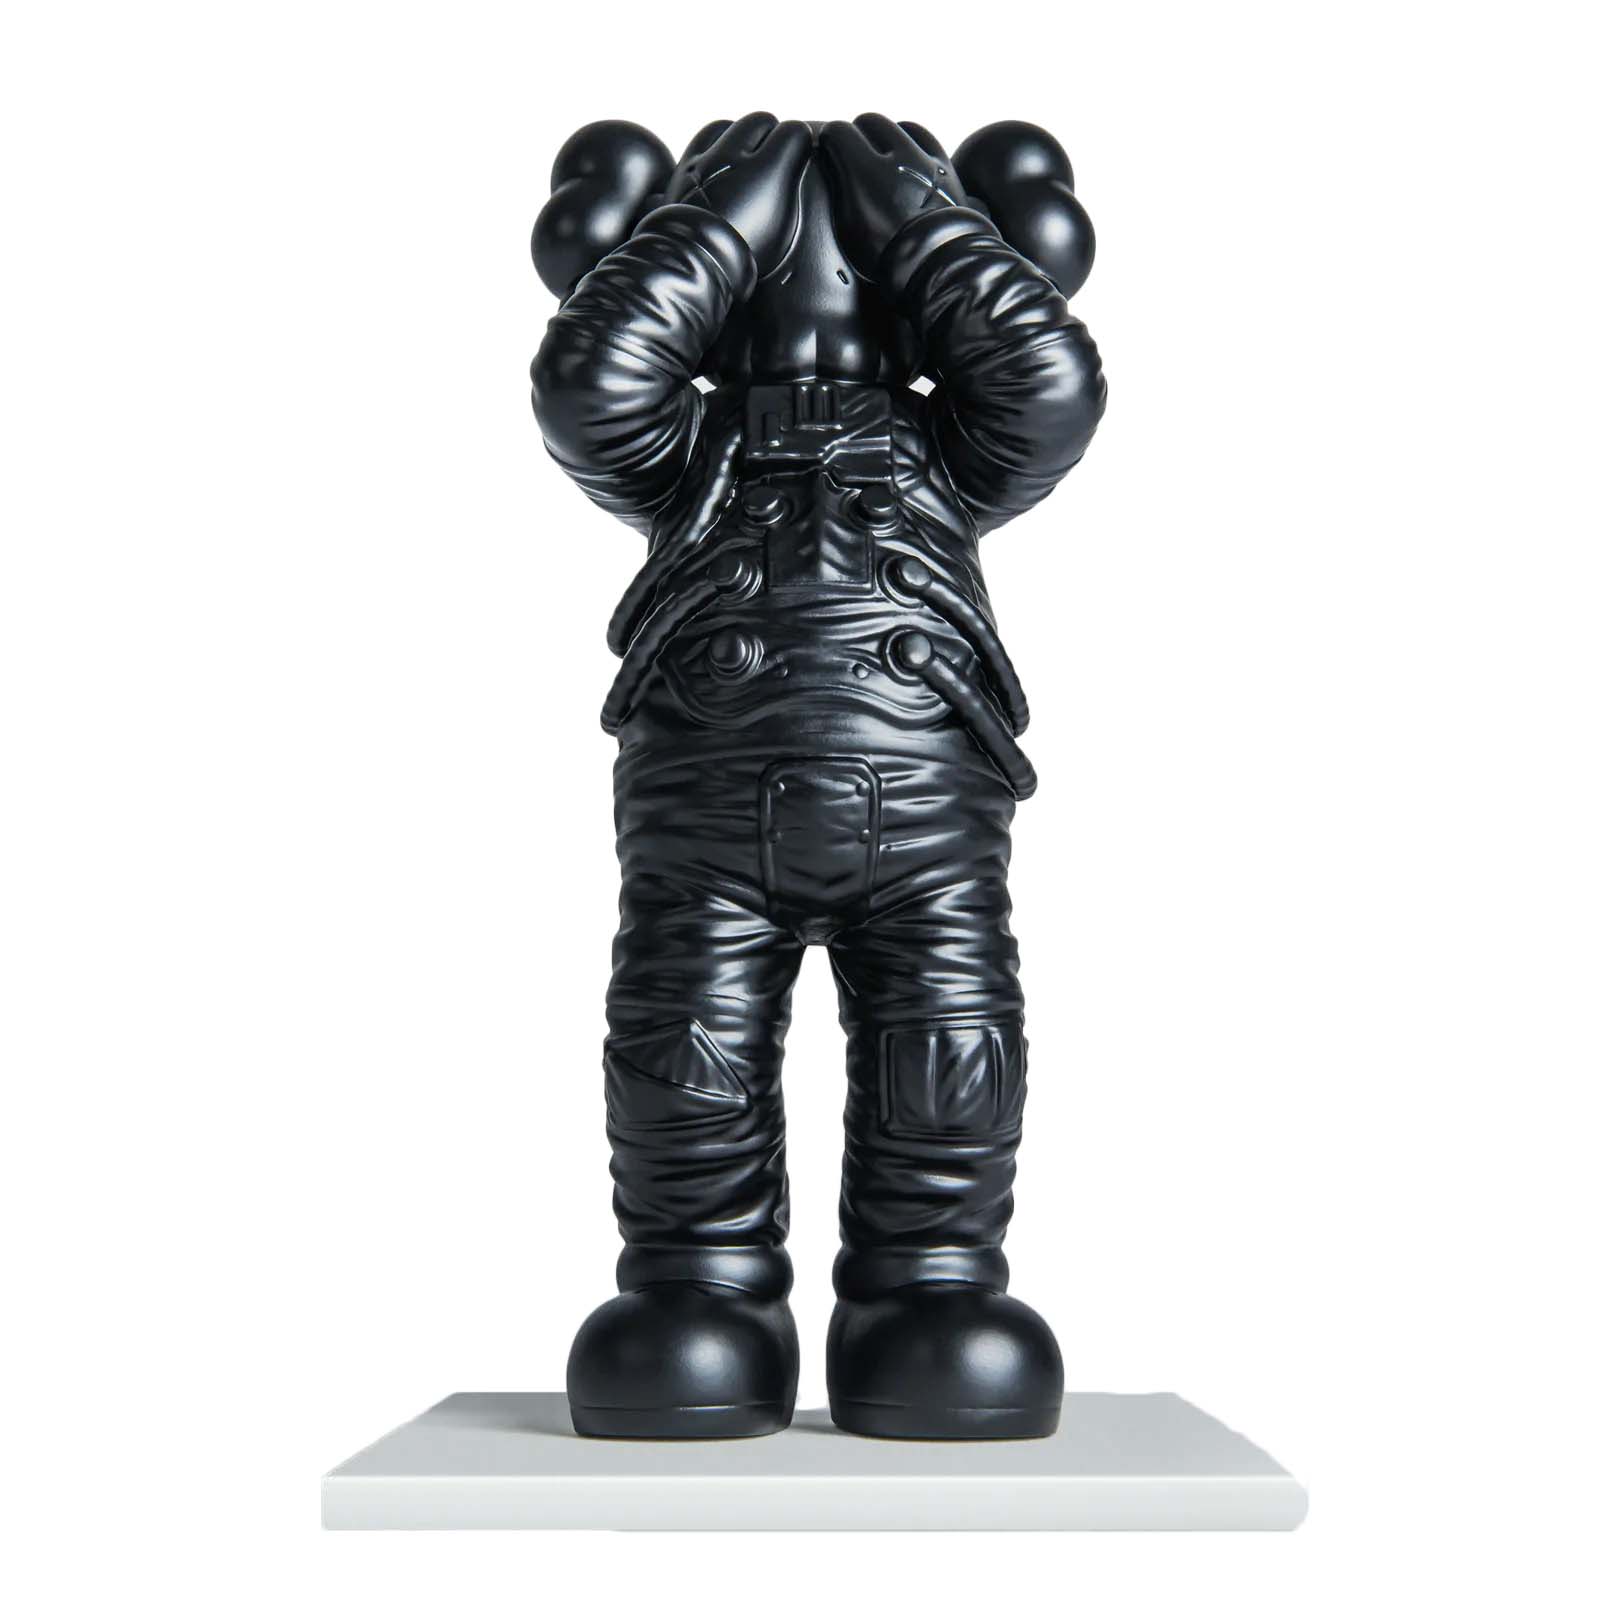 Space Invader 3D Little Big Space Figure (Edition of 5000) - US